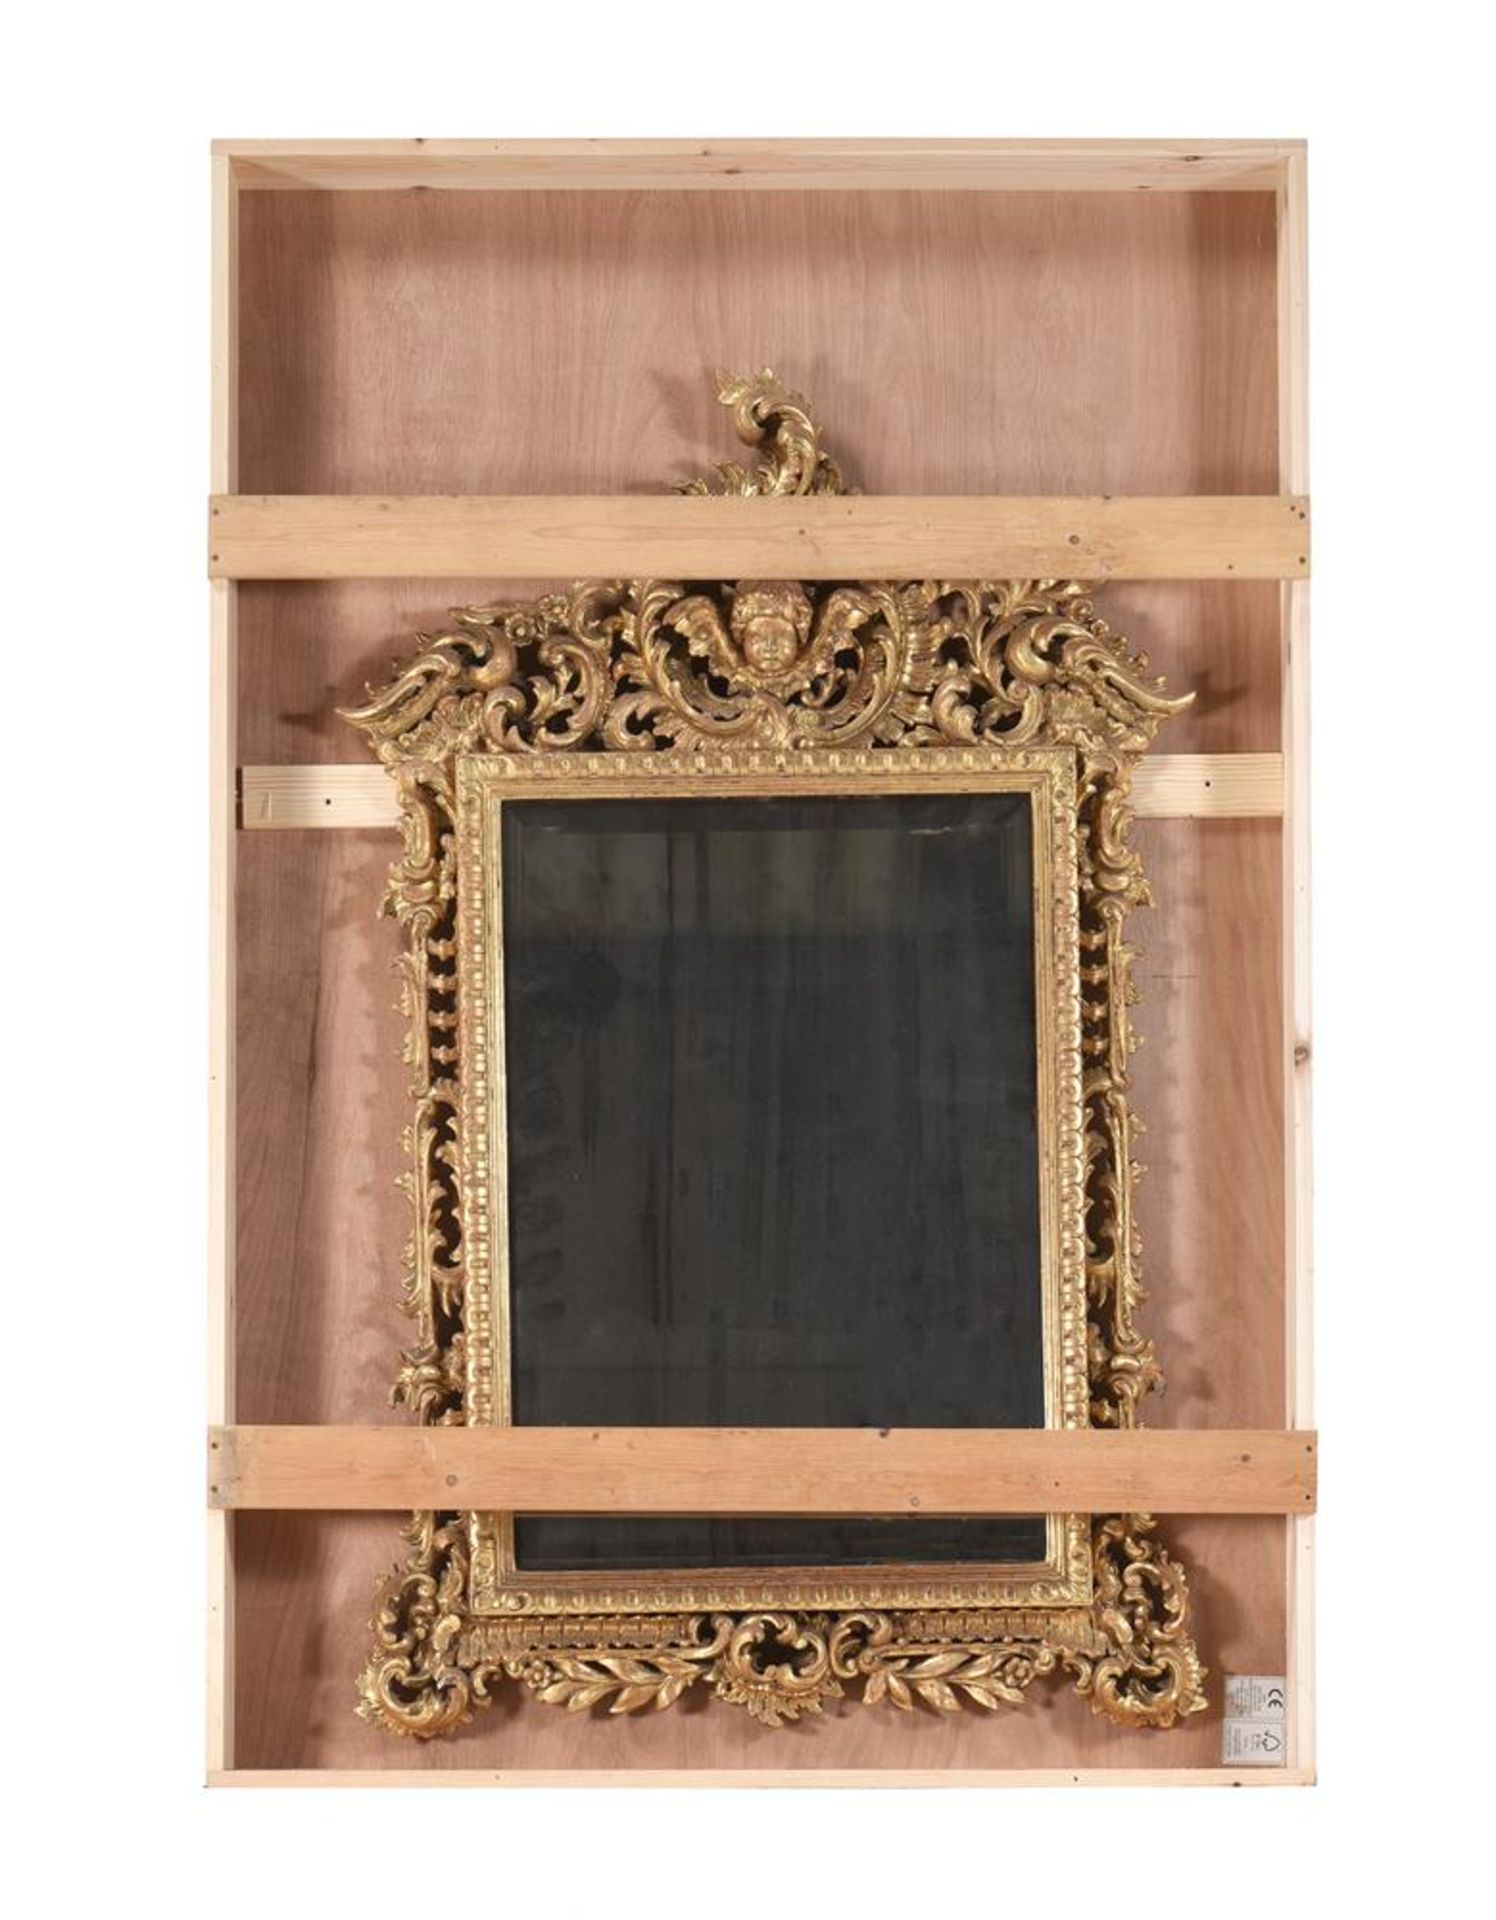 A CONTINENTAL CARVED GILTWOOD MIRROR, POSSIBLY ITALIAN, 19TH CENTURY - Image 4 of 4